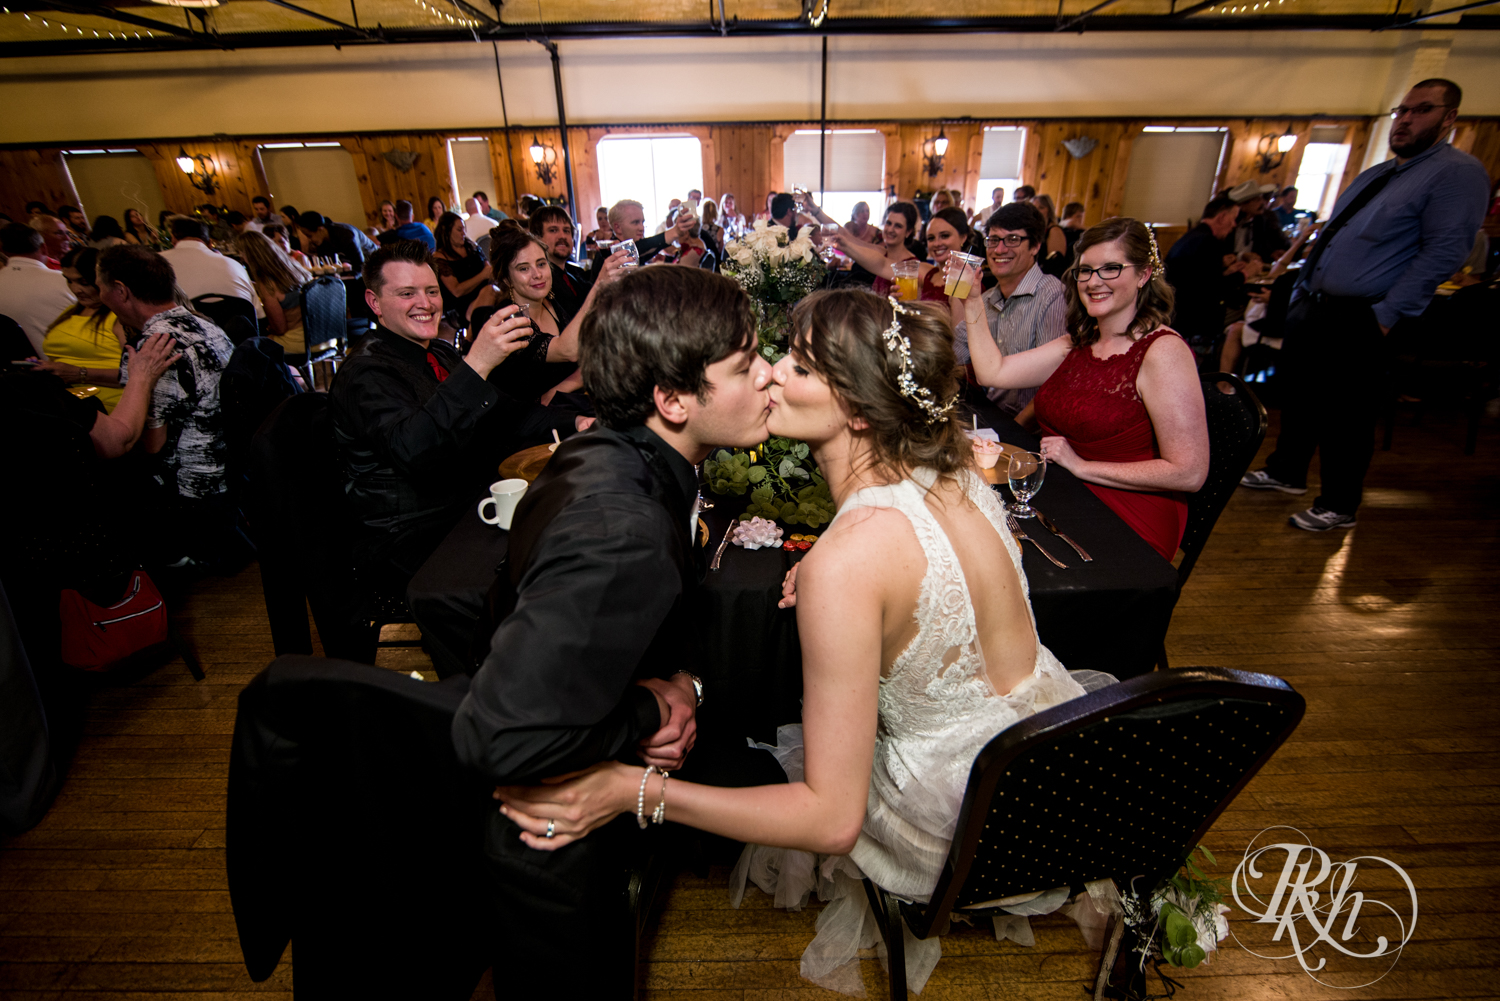 Bride and groom kiss at wedding reception at Kellerman's Event Center in White Bear Lake, Minnesota.